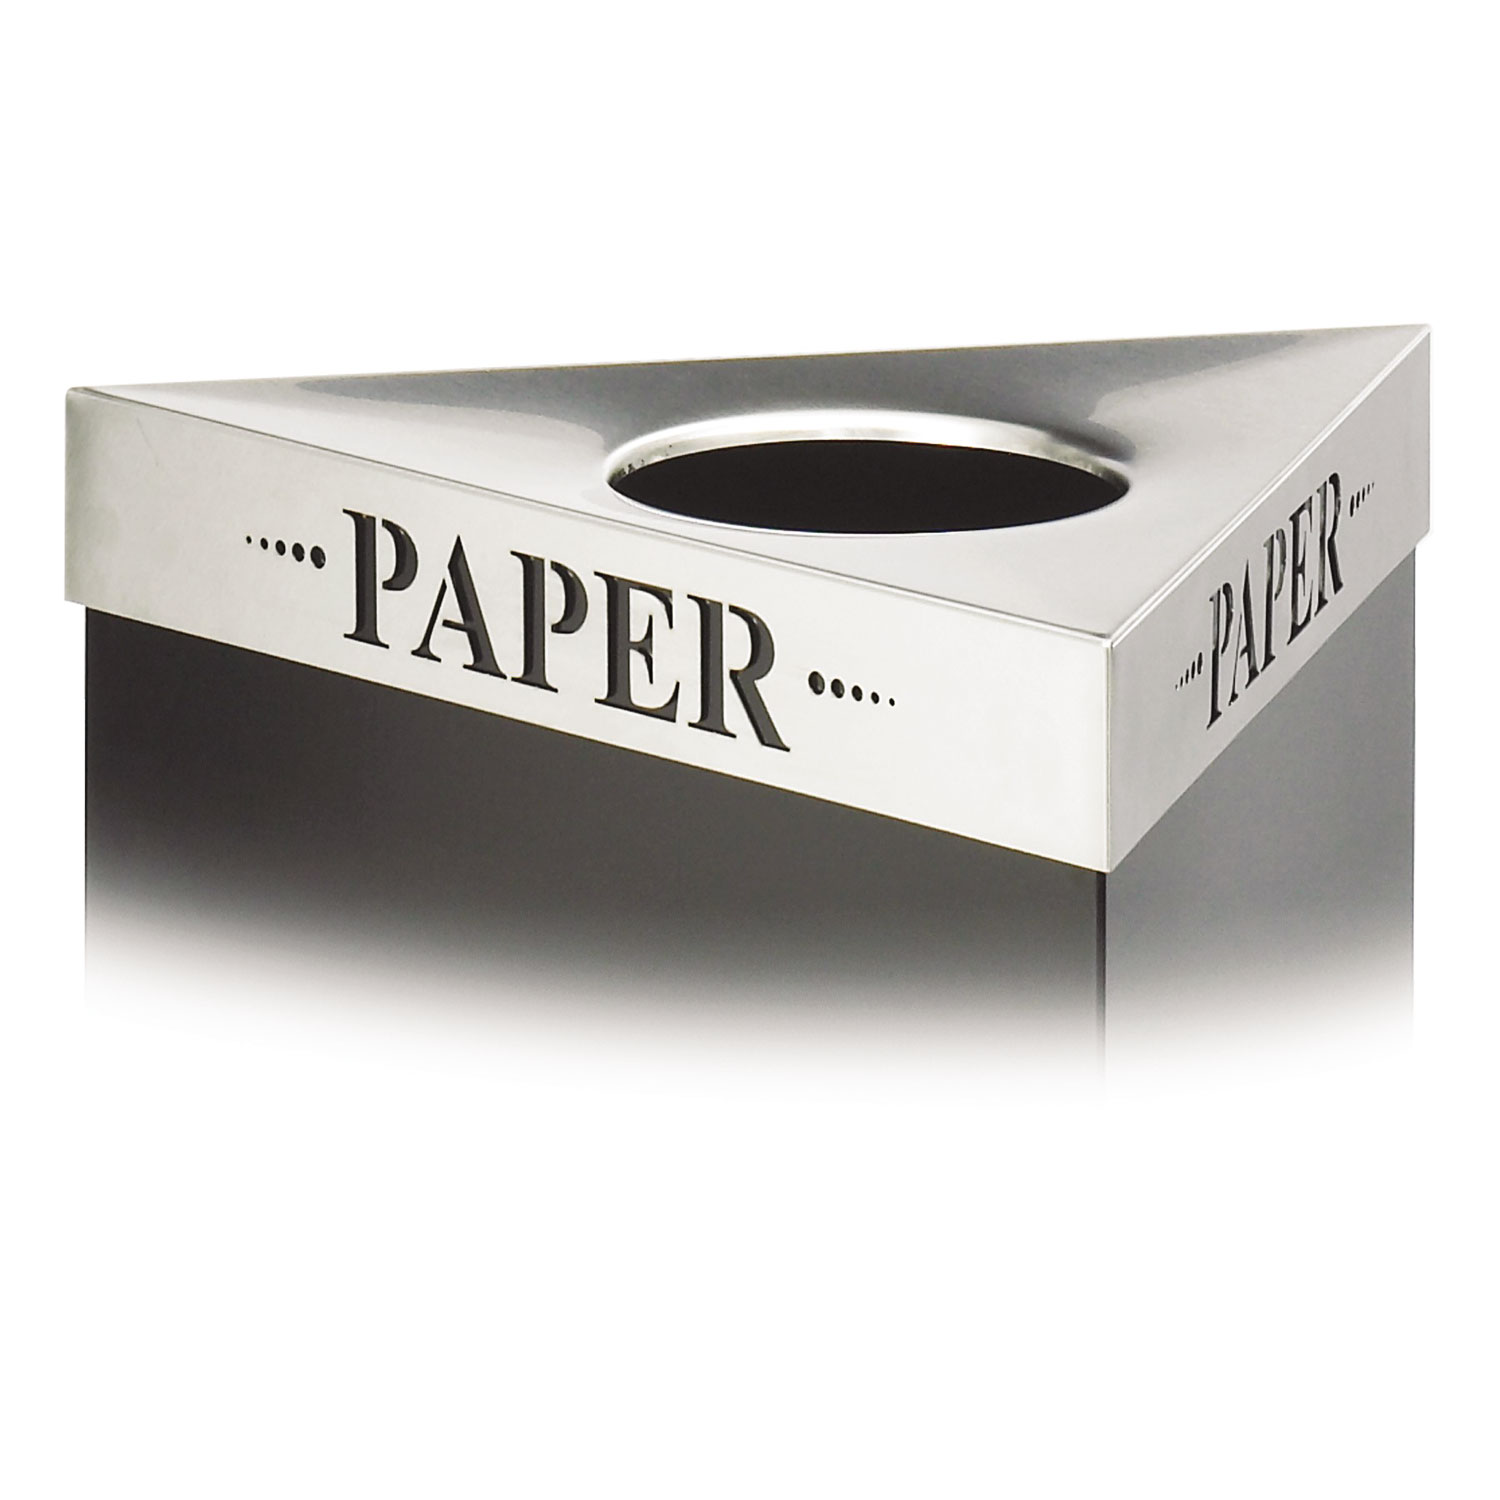 Safco SAF9560PA  Trifecta Waste Receptacle Lid, Laser Cut "PAPER" Inscription, Stainless Steel